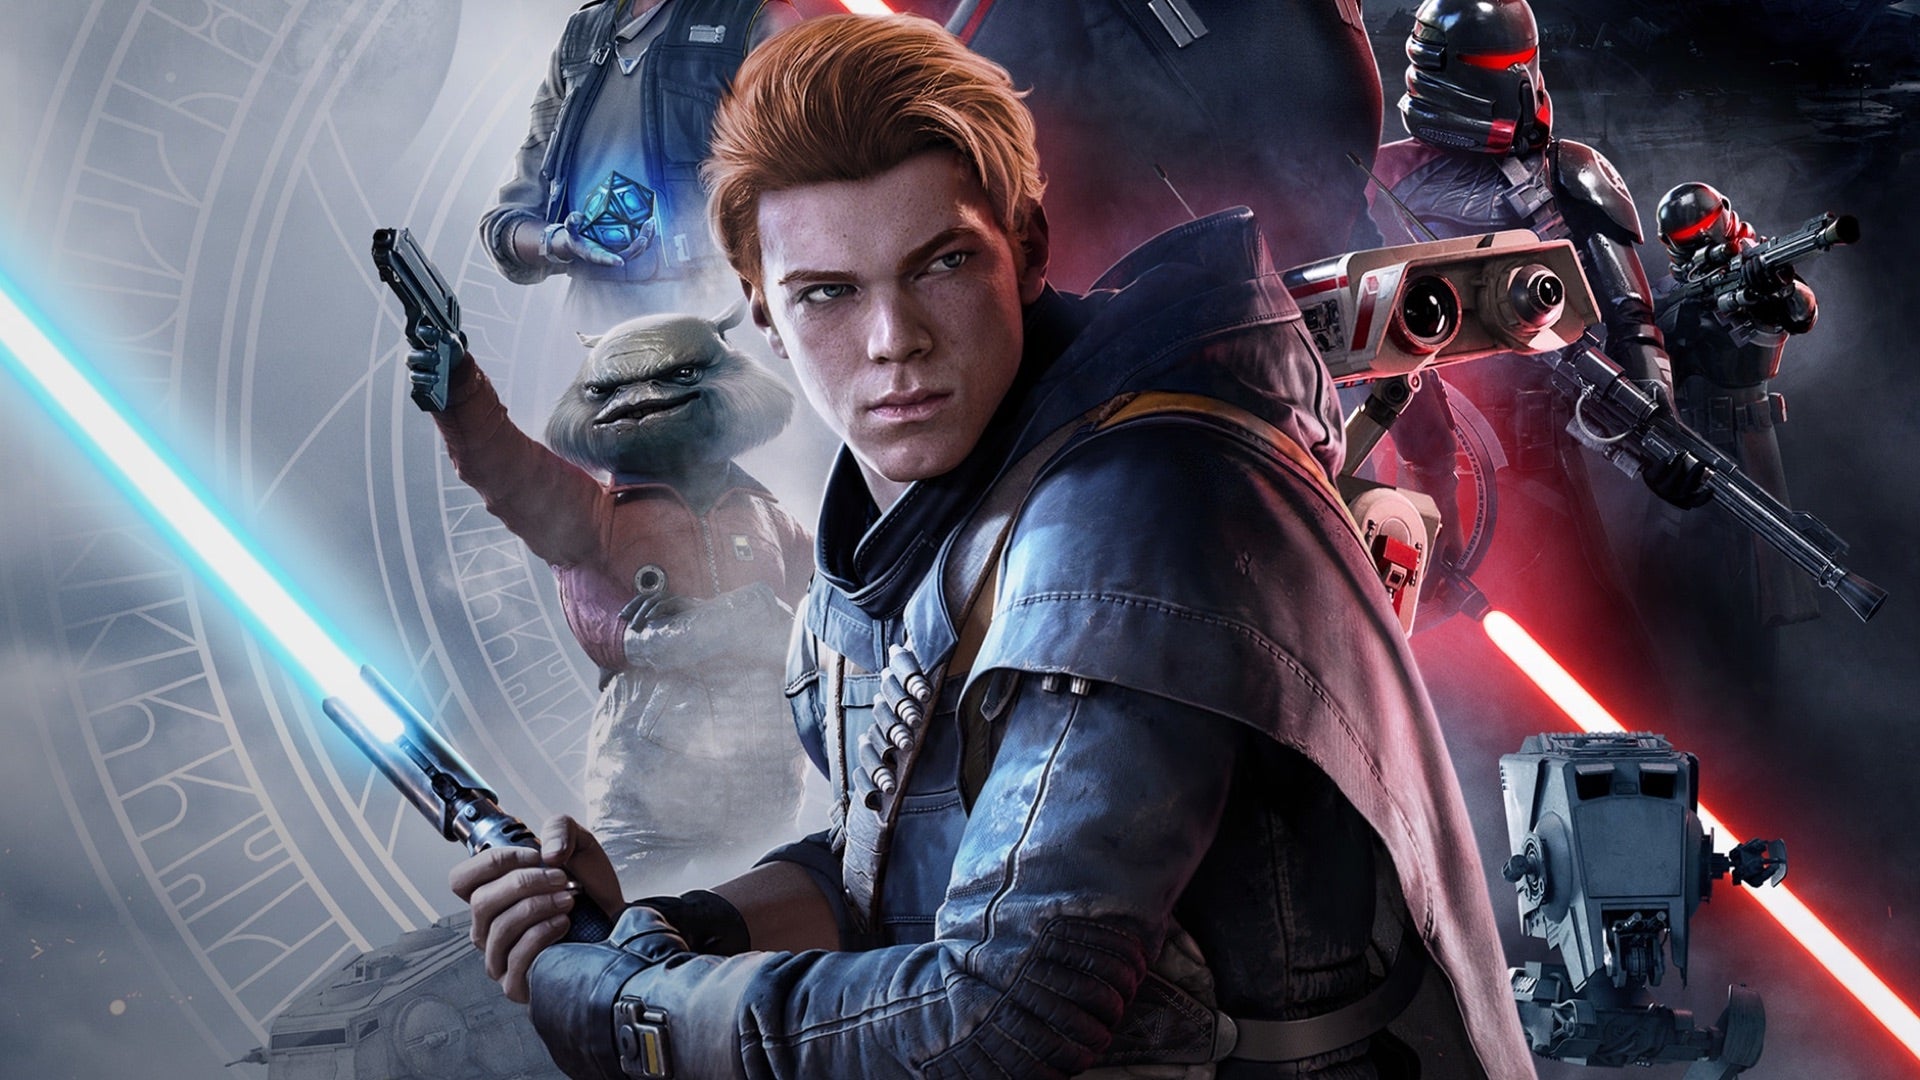 Image for Star Wars Jedi: Fallen Order 2 reportedly out 2023 for PS5, Series X/S and PC